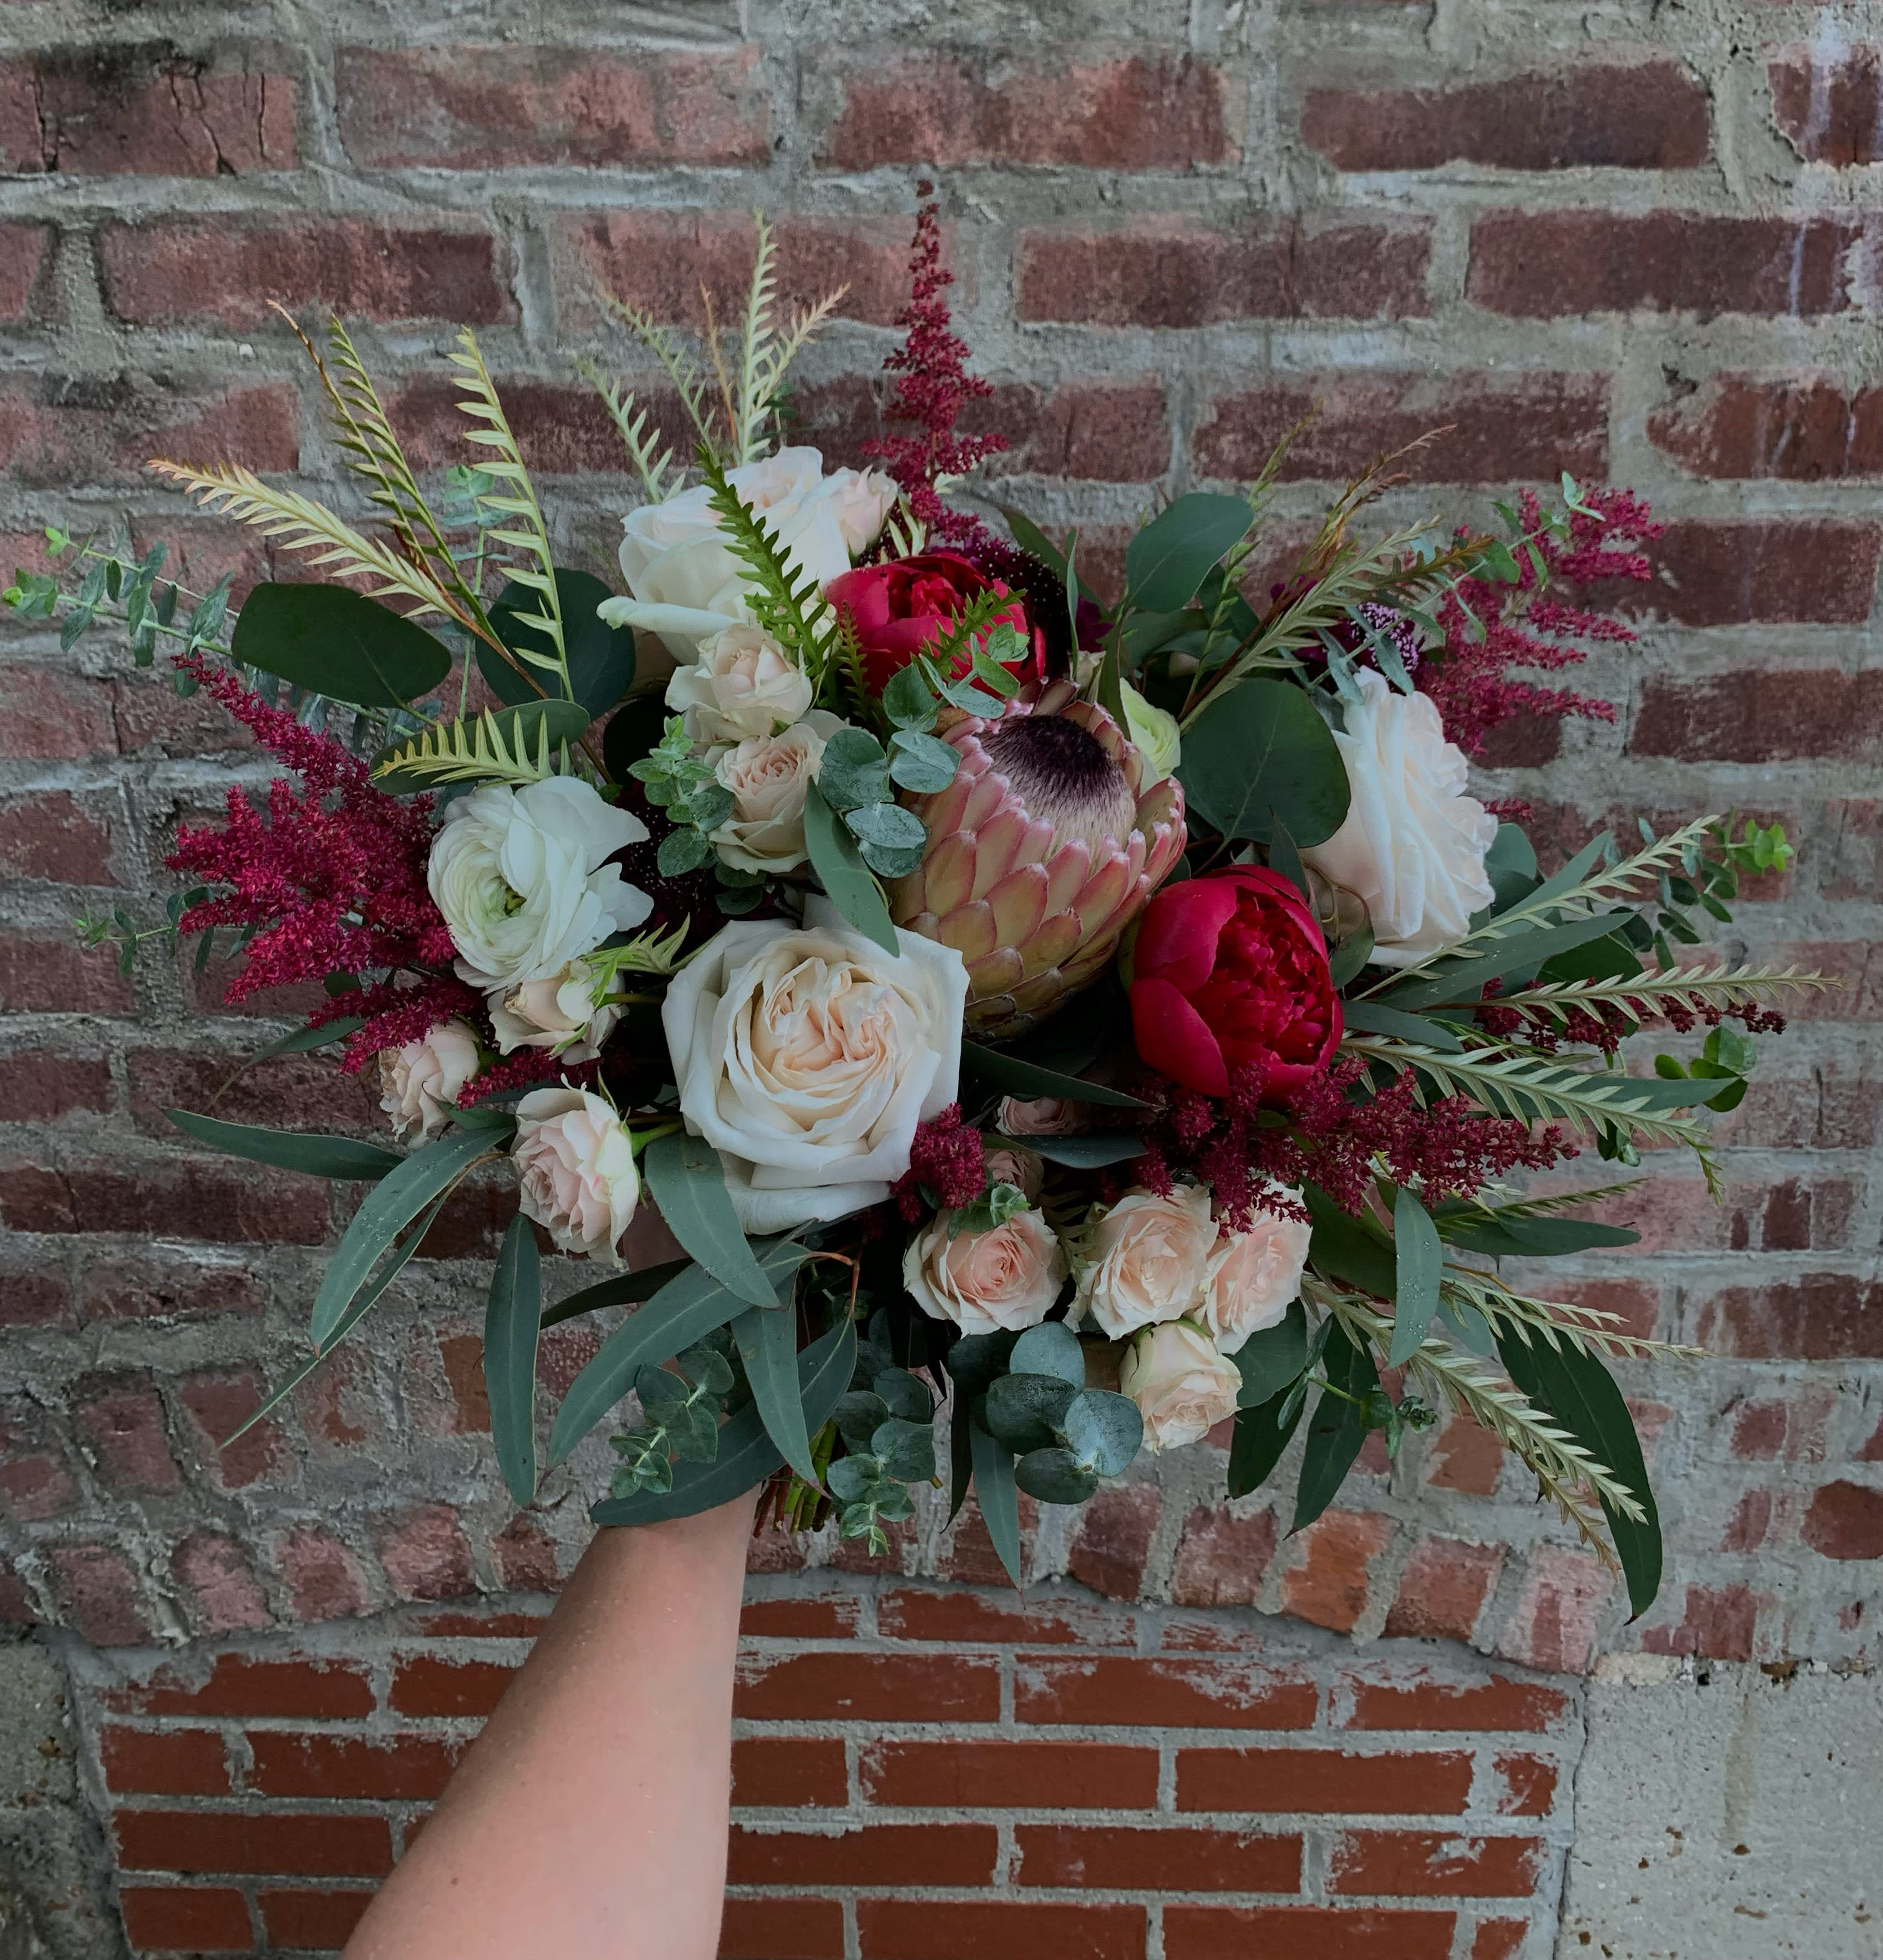 Funky in Fall - This fall design feature a protea with fun textures and premium flowers. Perfect for a gift just because or a unique fall centerpiece!